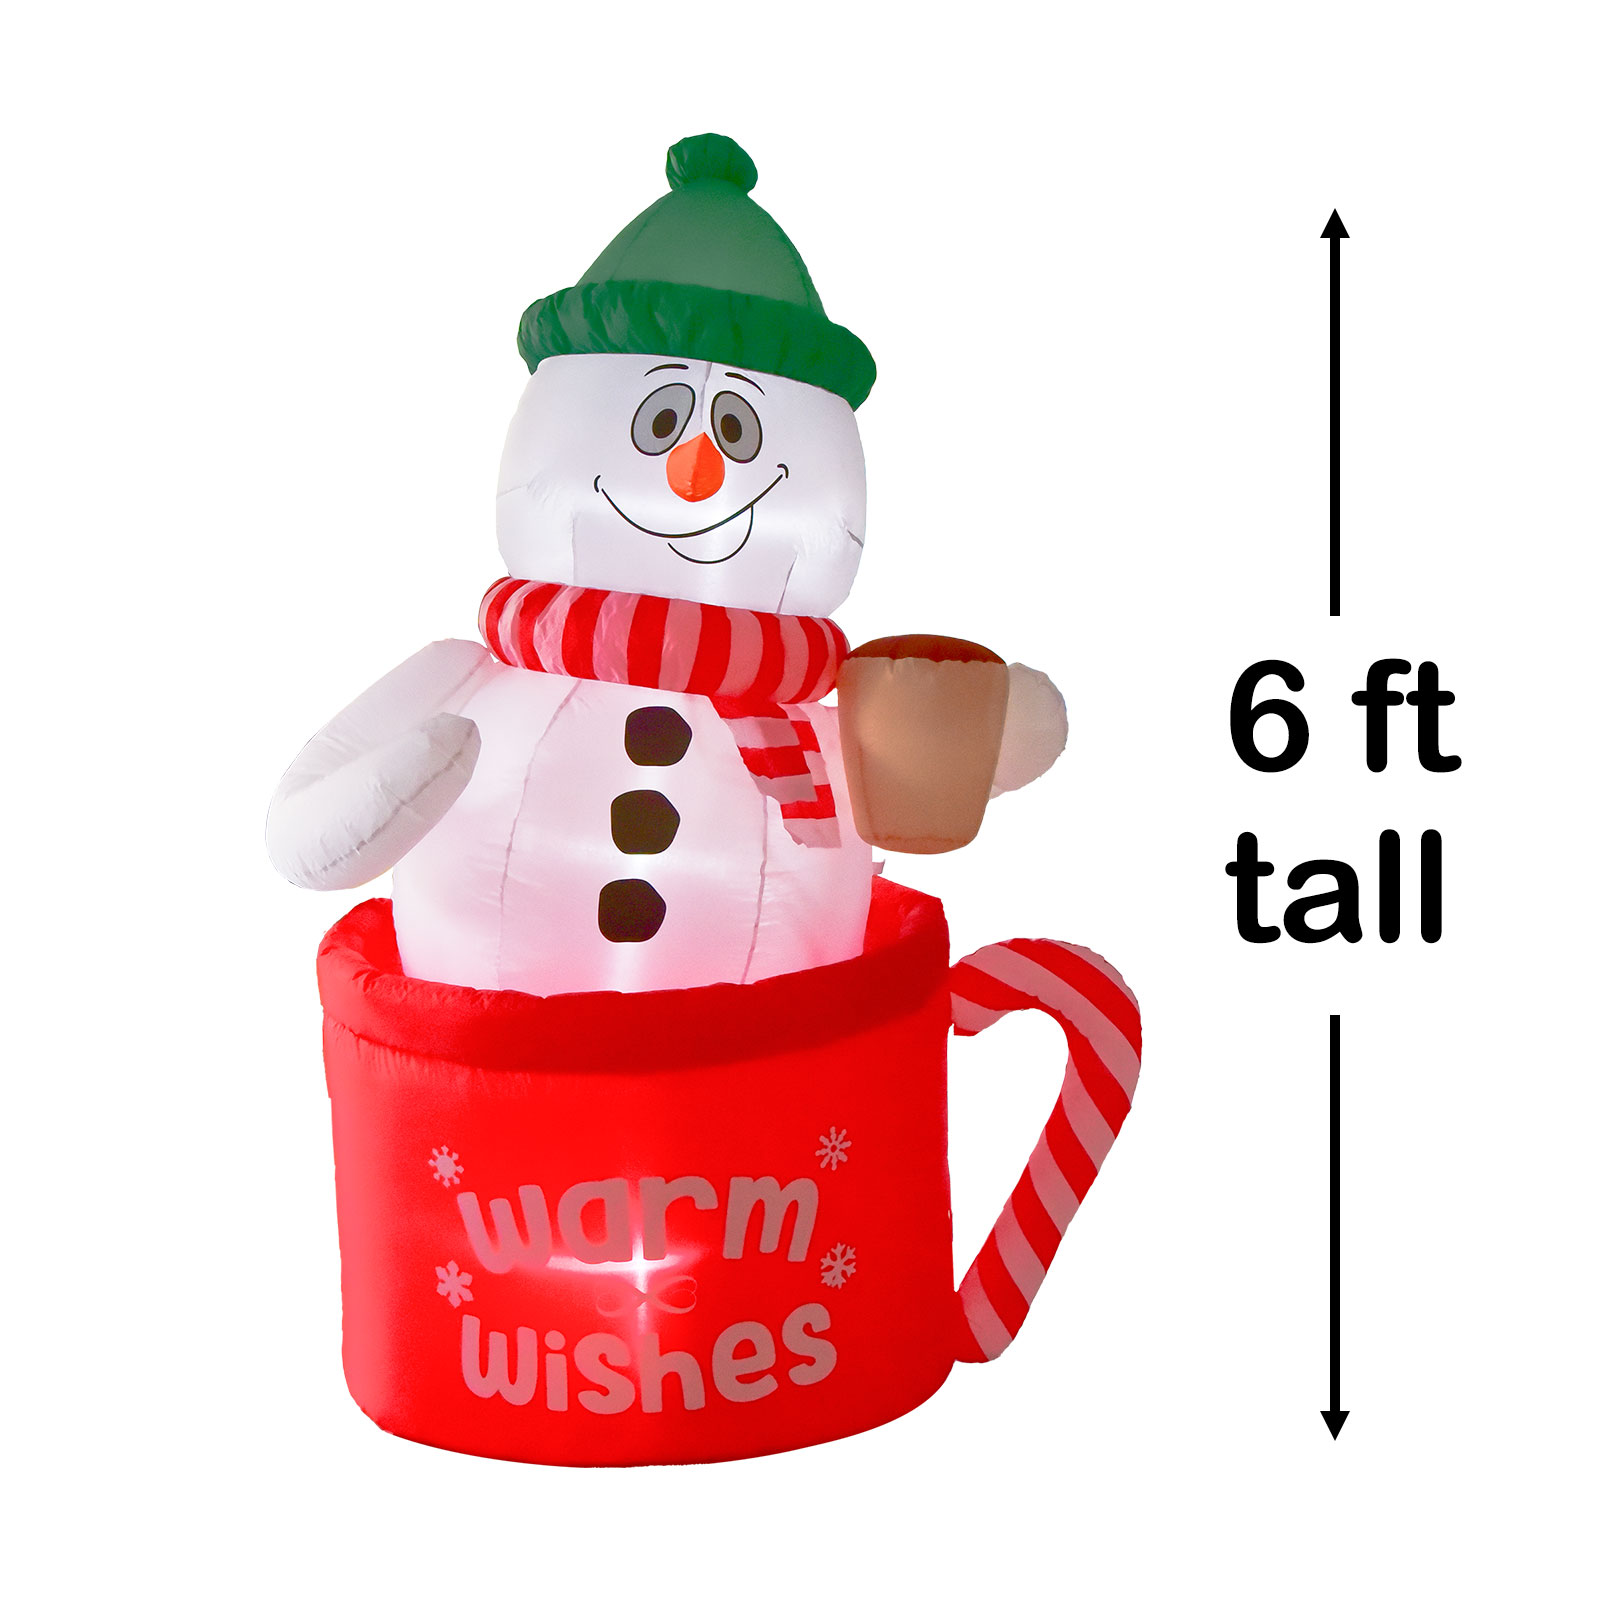 Nifti Nest 4 Ft Long x 6 Ft Tall Christmas Inflatables Snowman in Frosty Mug with Built-in LED Lights, Christmas Blow Up Yard Decorations for Holiday Lawn, Garden, Christmas Decorations - image 5 of 8